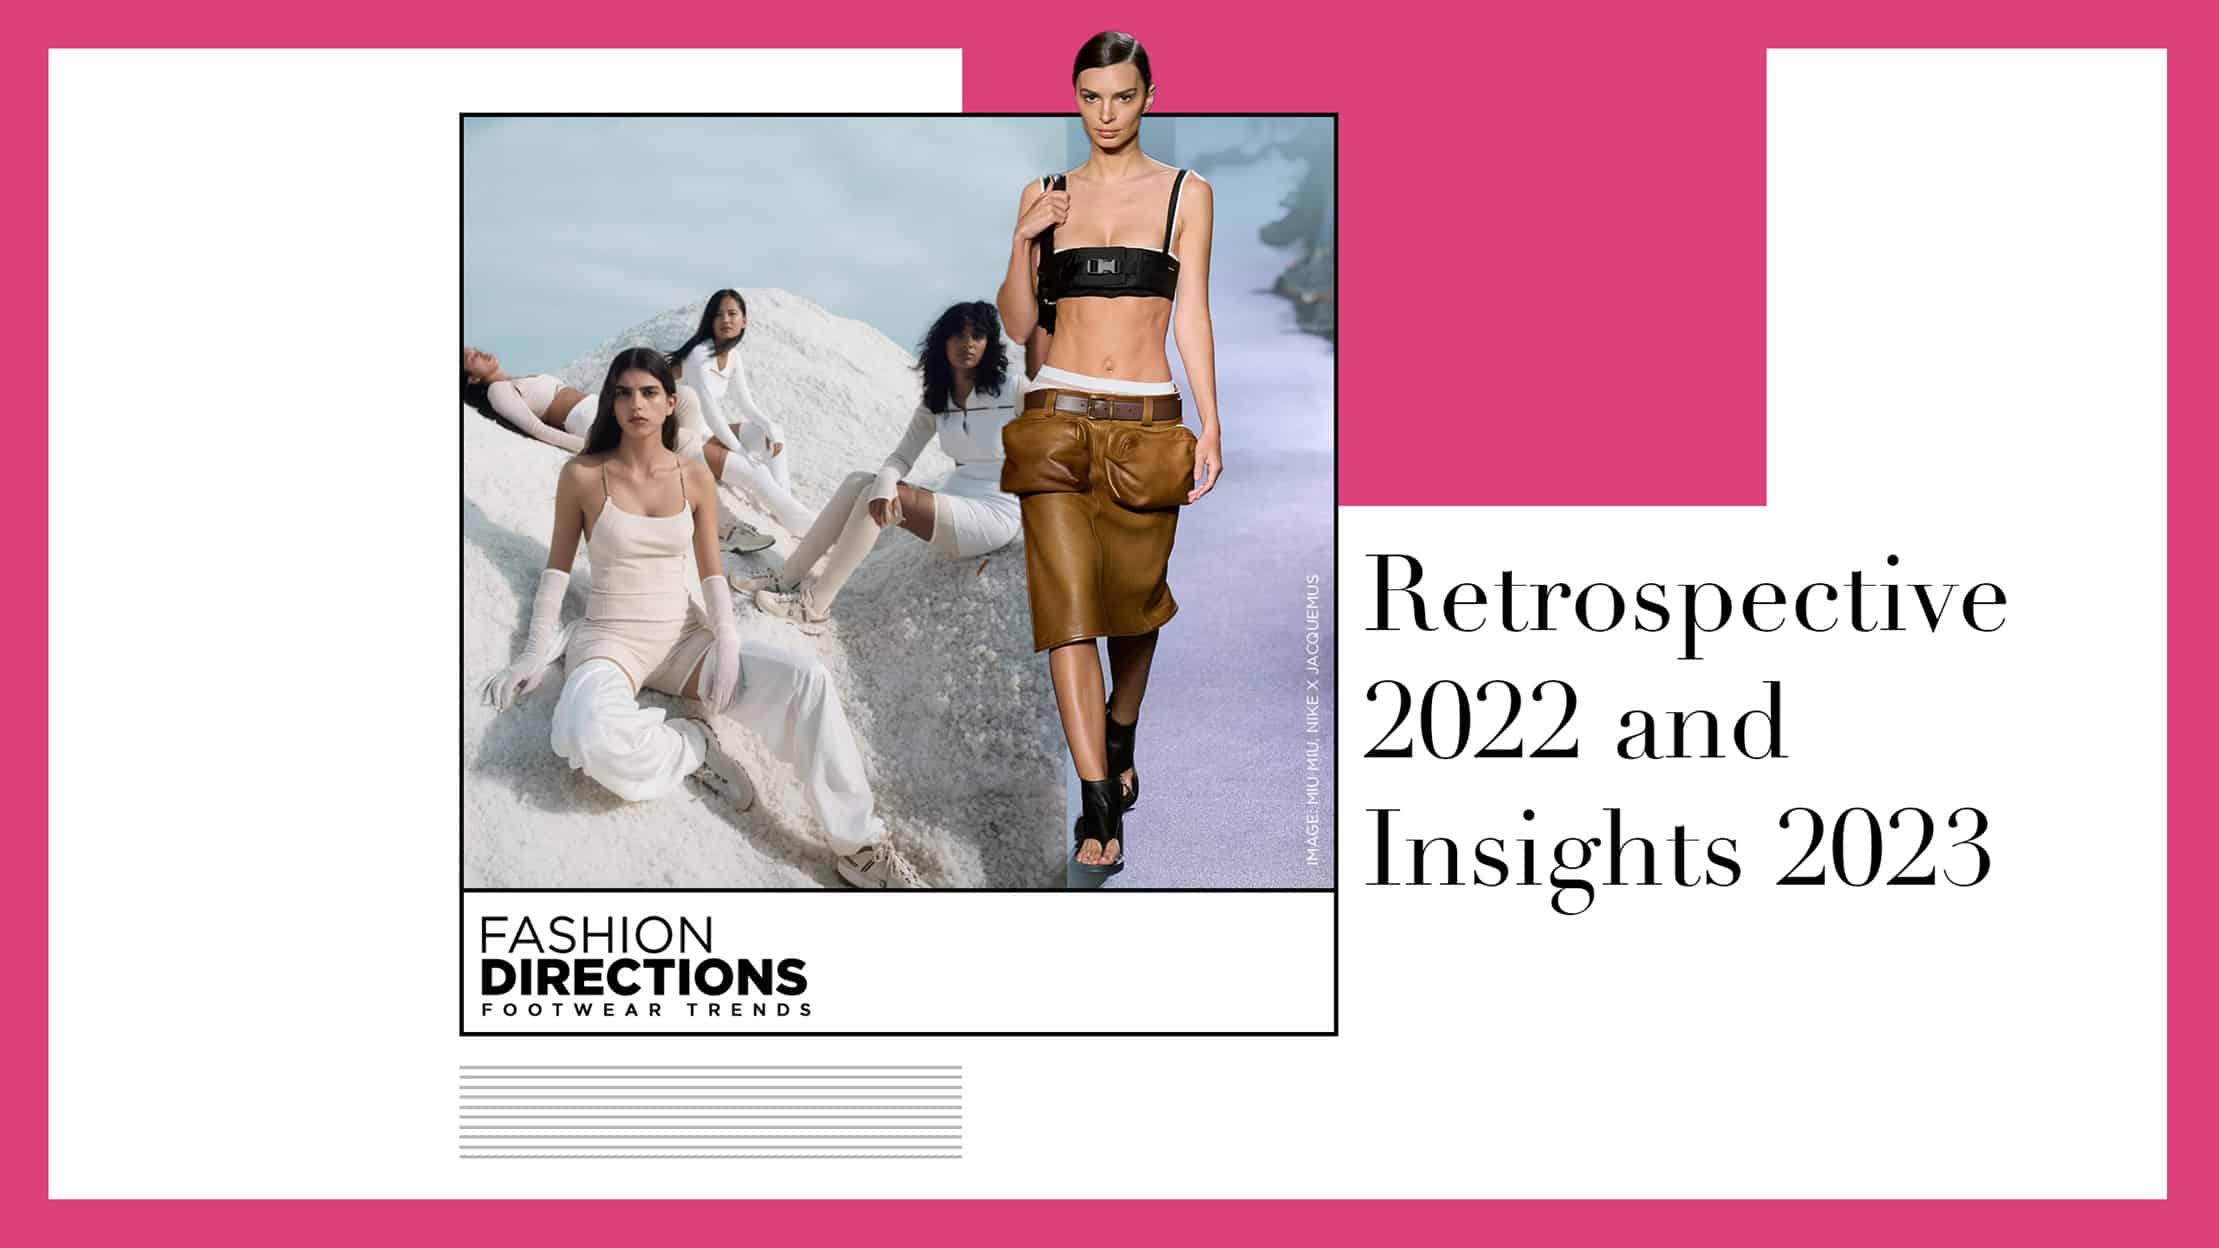 RETROSPECTIVE 2022 AND INSIGHTS 2023 1